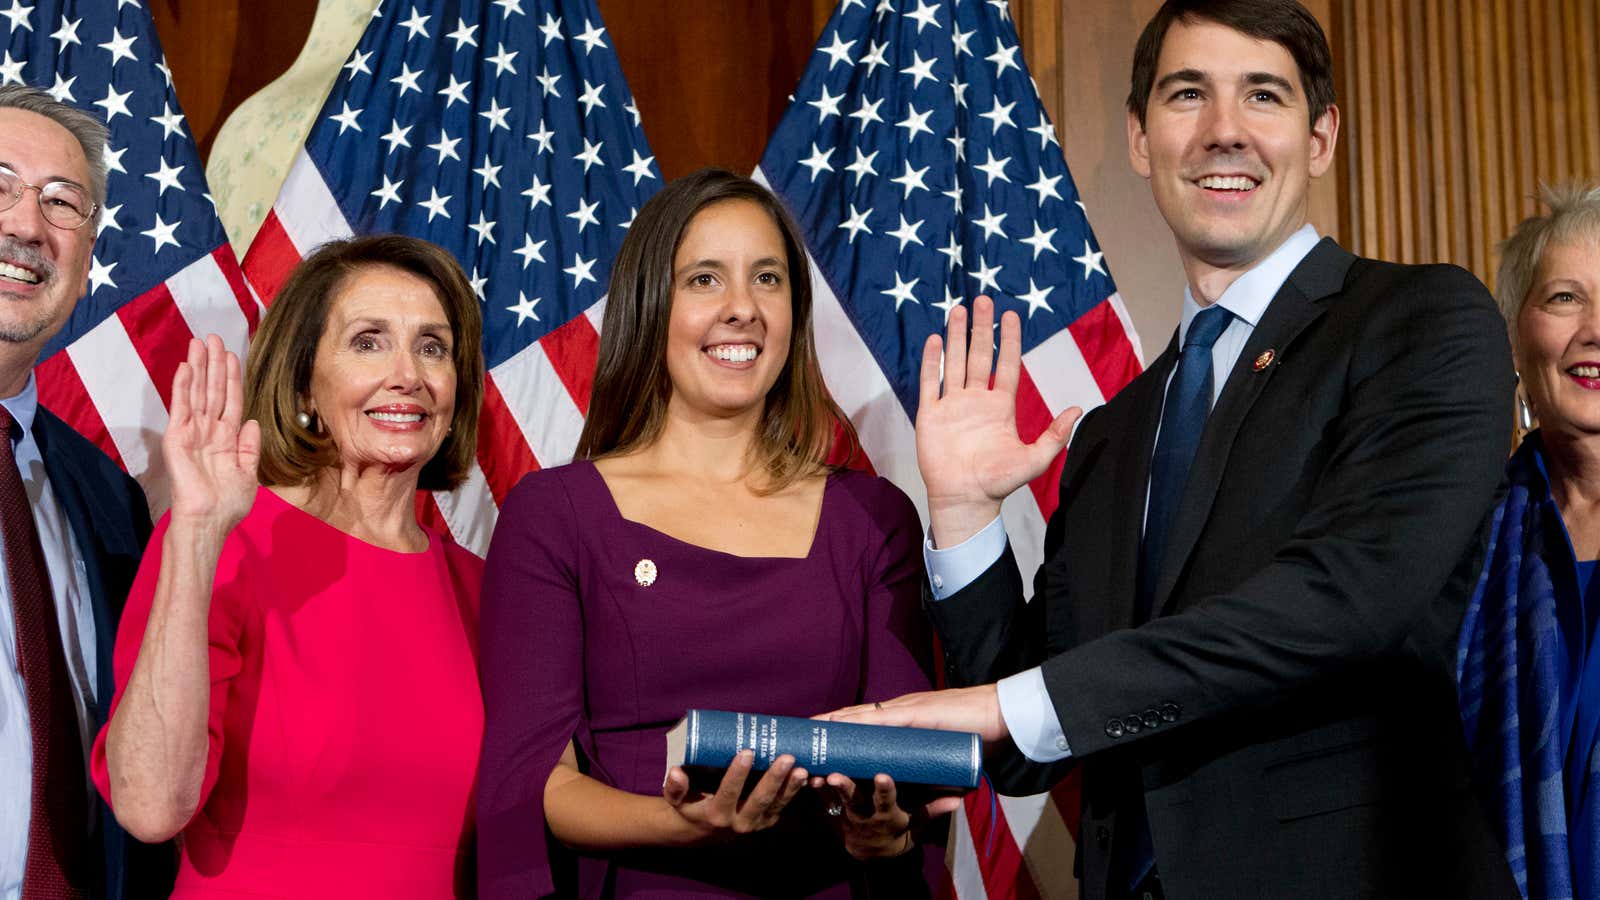 House Speaker Nancy Pelosi of Calif., administers the House oath of office to Rep. Josh Harder, D-Calif., during ceremonial swearing-in on Capitol Hill in Washington, Thursday, Jan. 3, 2019, during the opening session of the 116th Congress. (AP Photo/Jose Luis Magana)